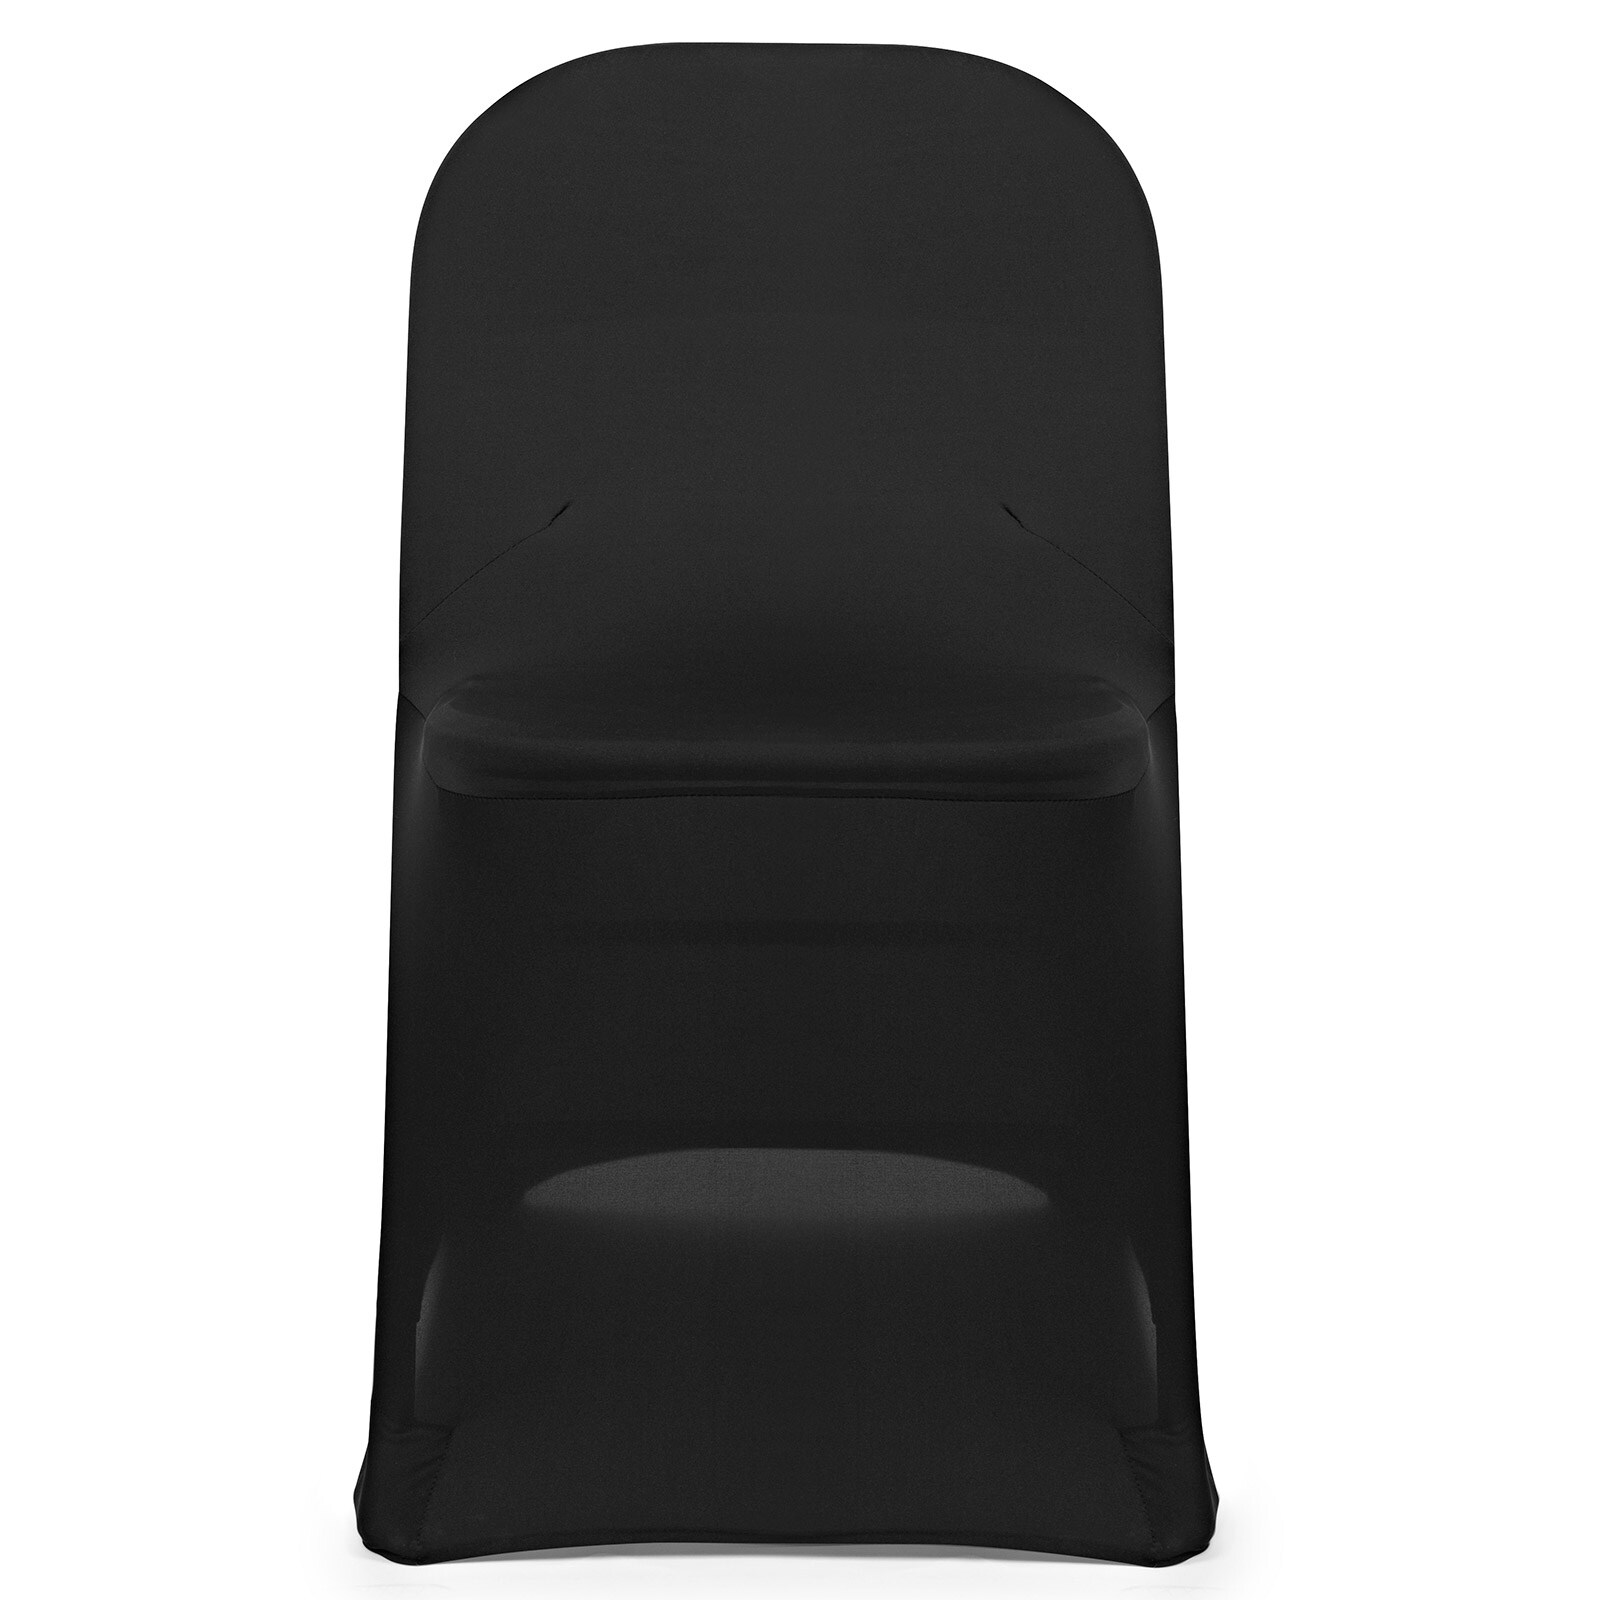 Buy Ascoza 50 Pack Black Spandex Chair Covers for High Back Chairs